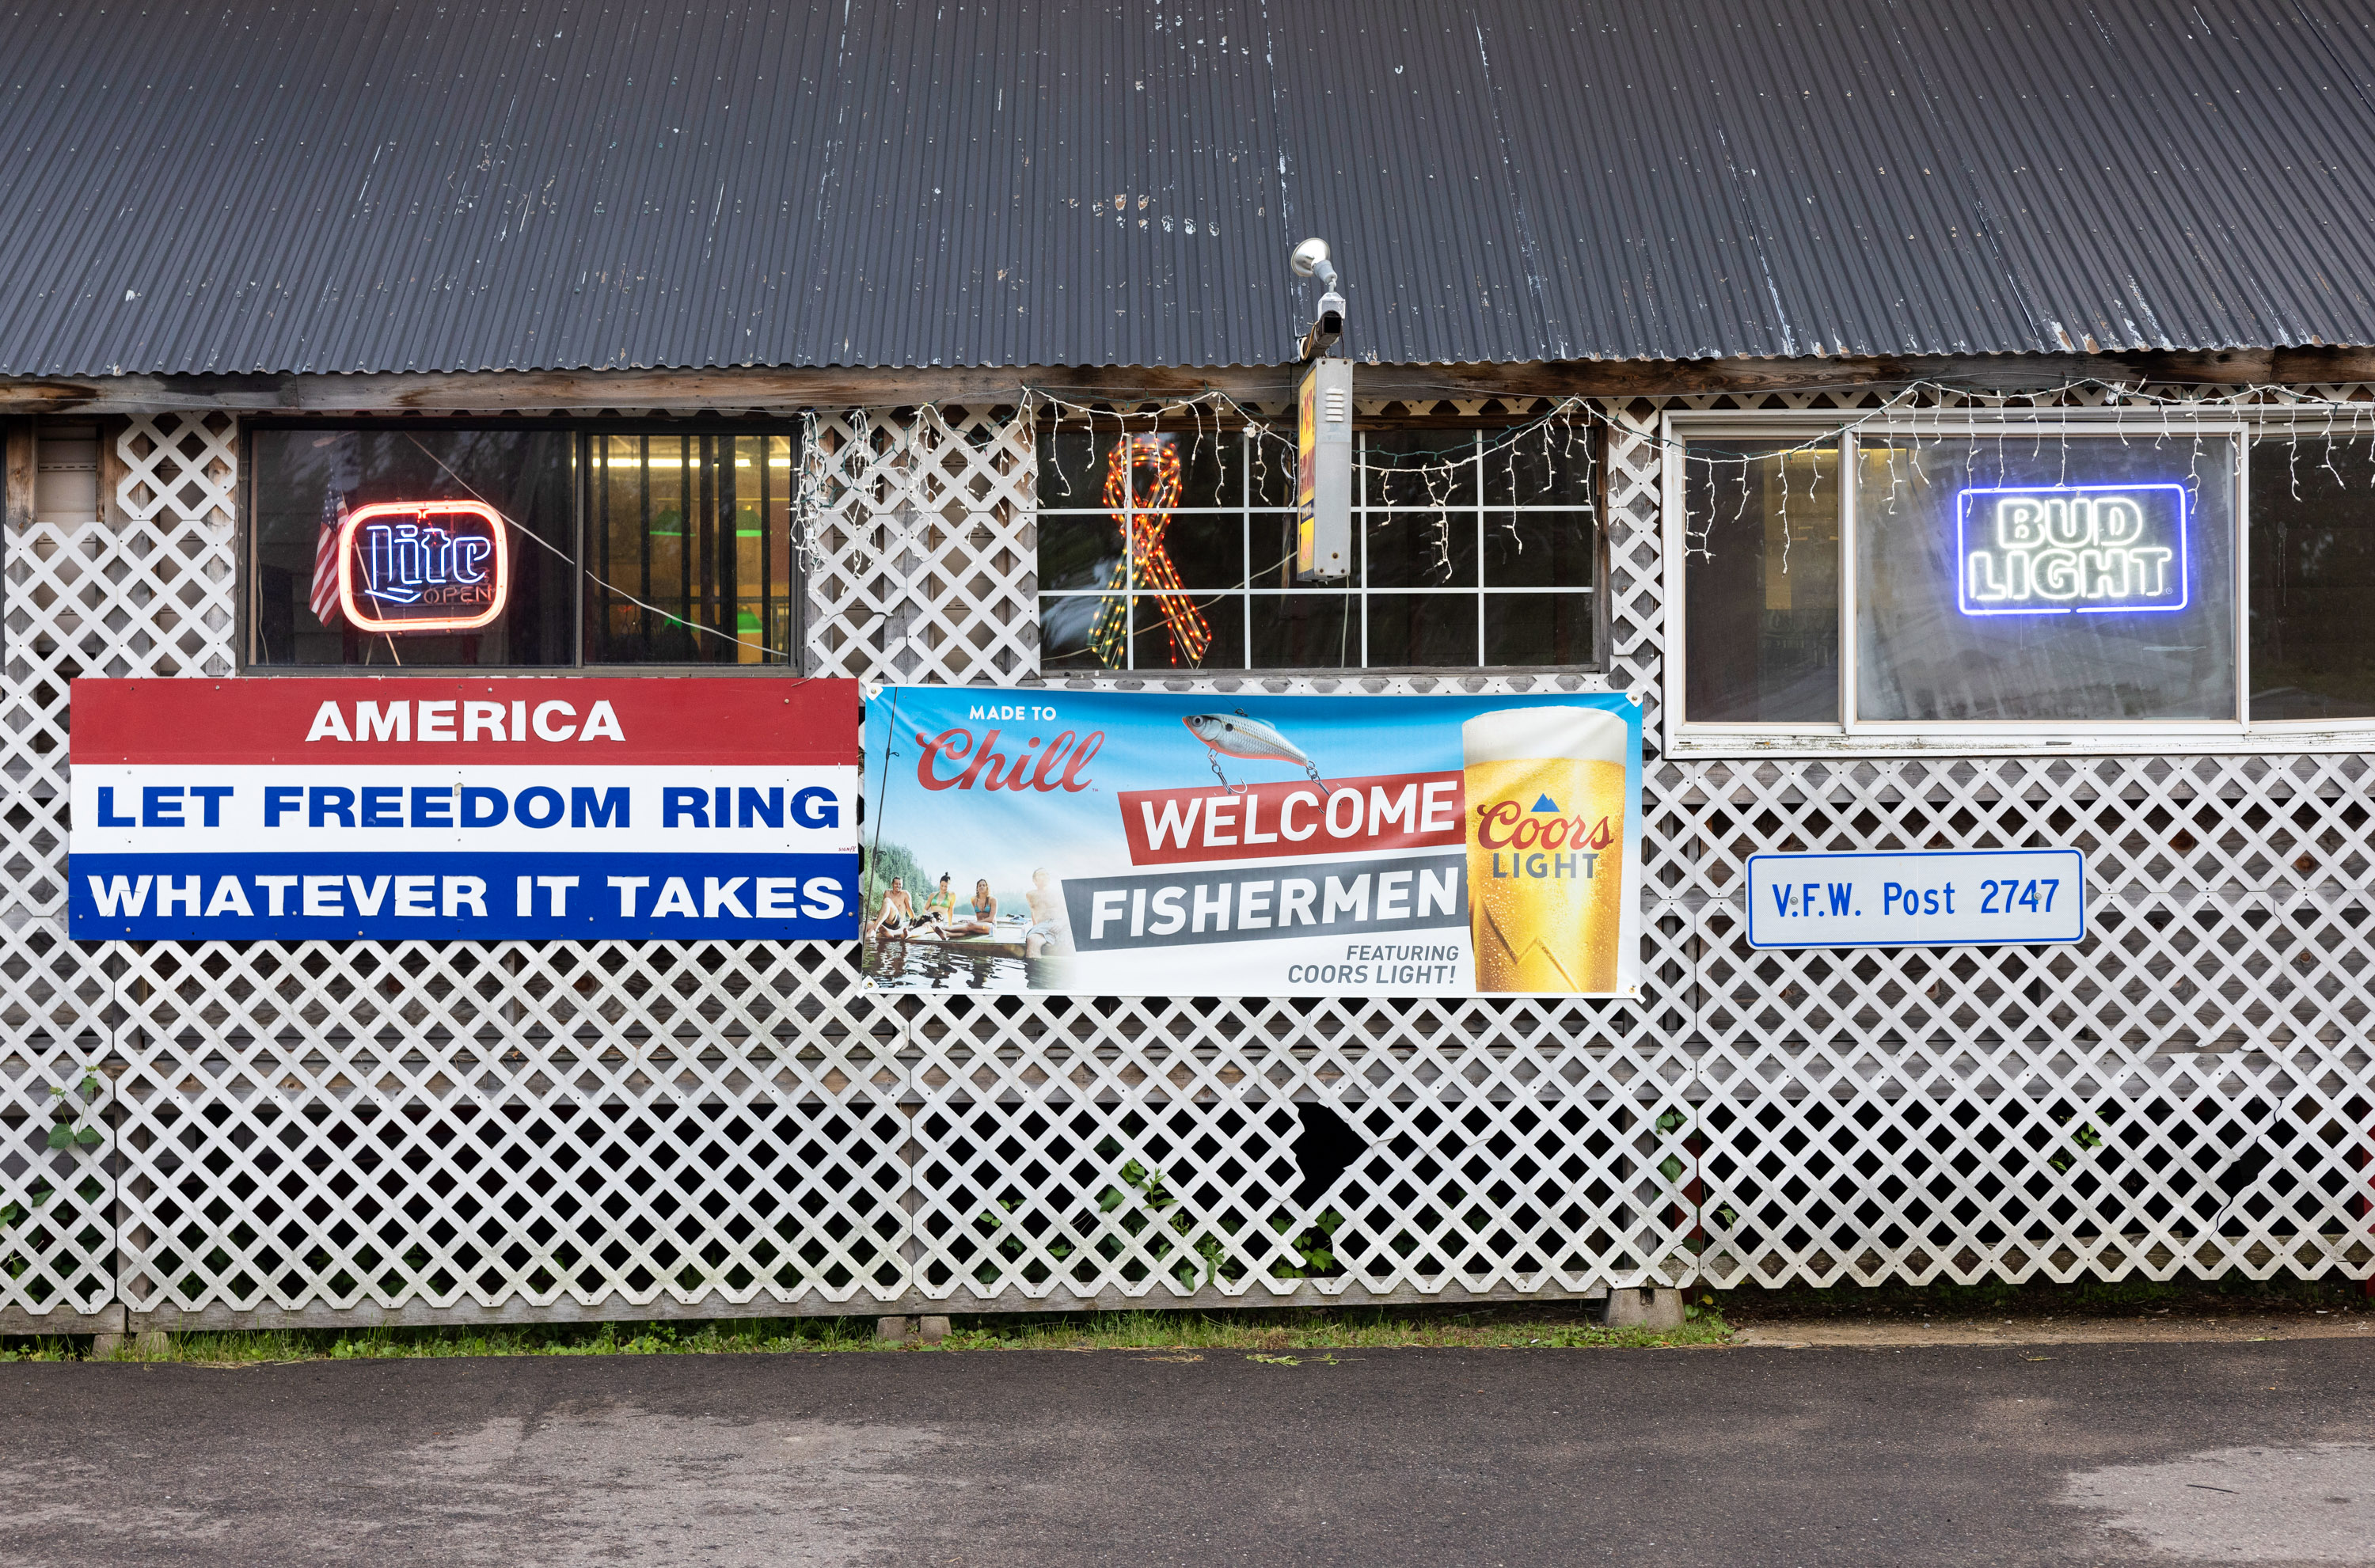 Signs on the side of the VFW read "America Let Freedom Ring Whatever it Takes" and "Welcome Fisherman"